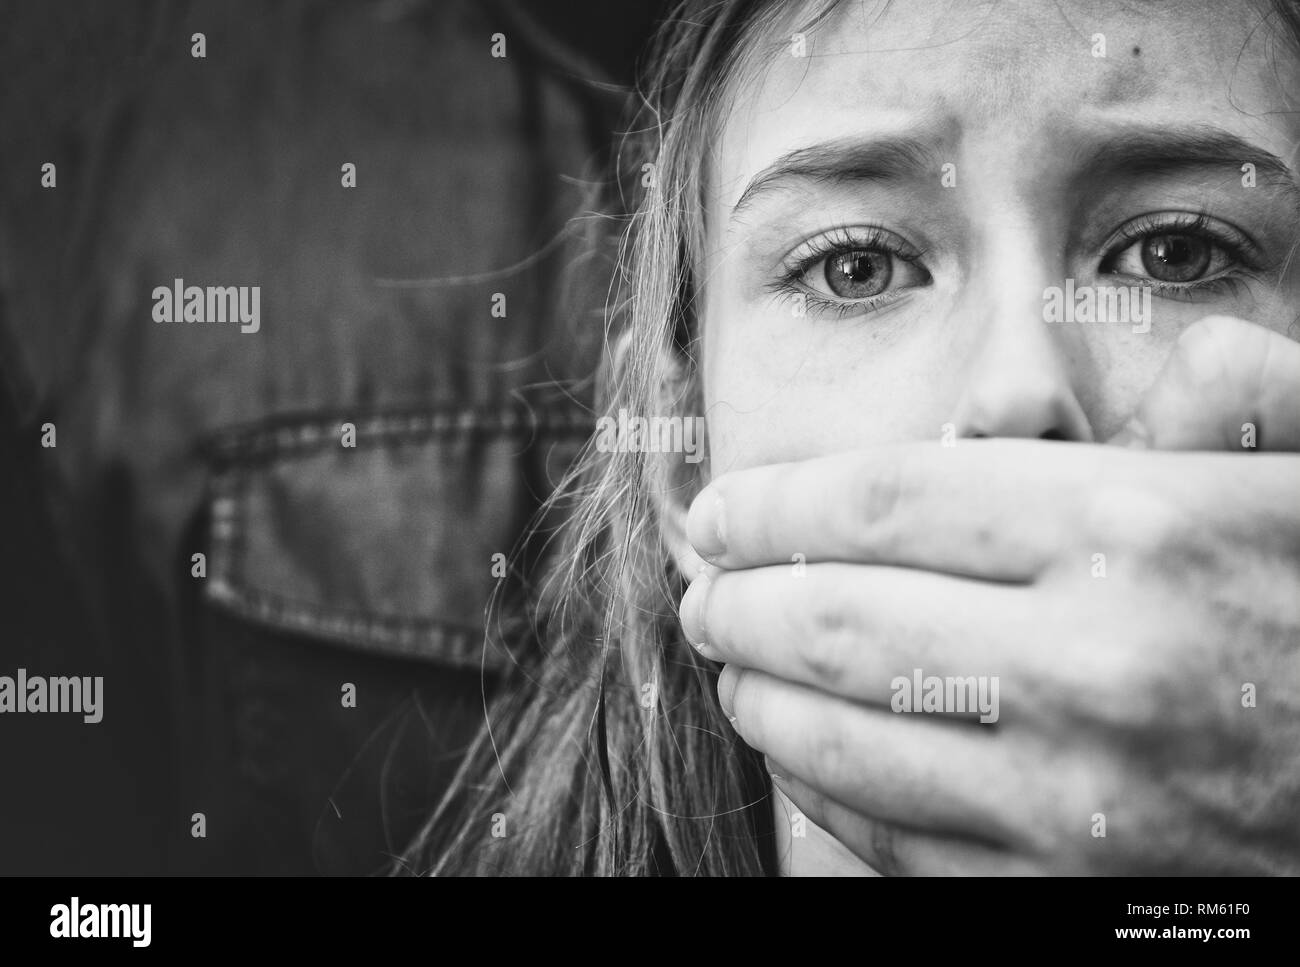 Man's hand covering mouth of scared young girl. Stock Photo